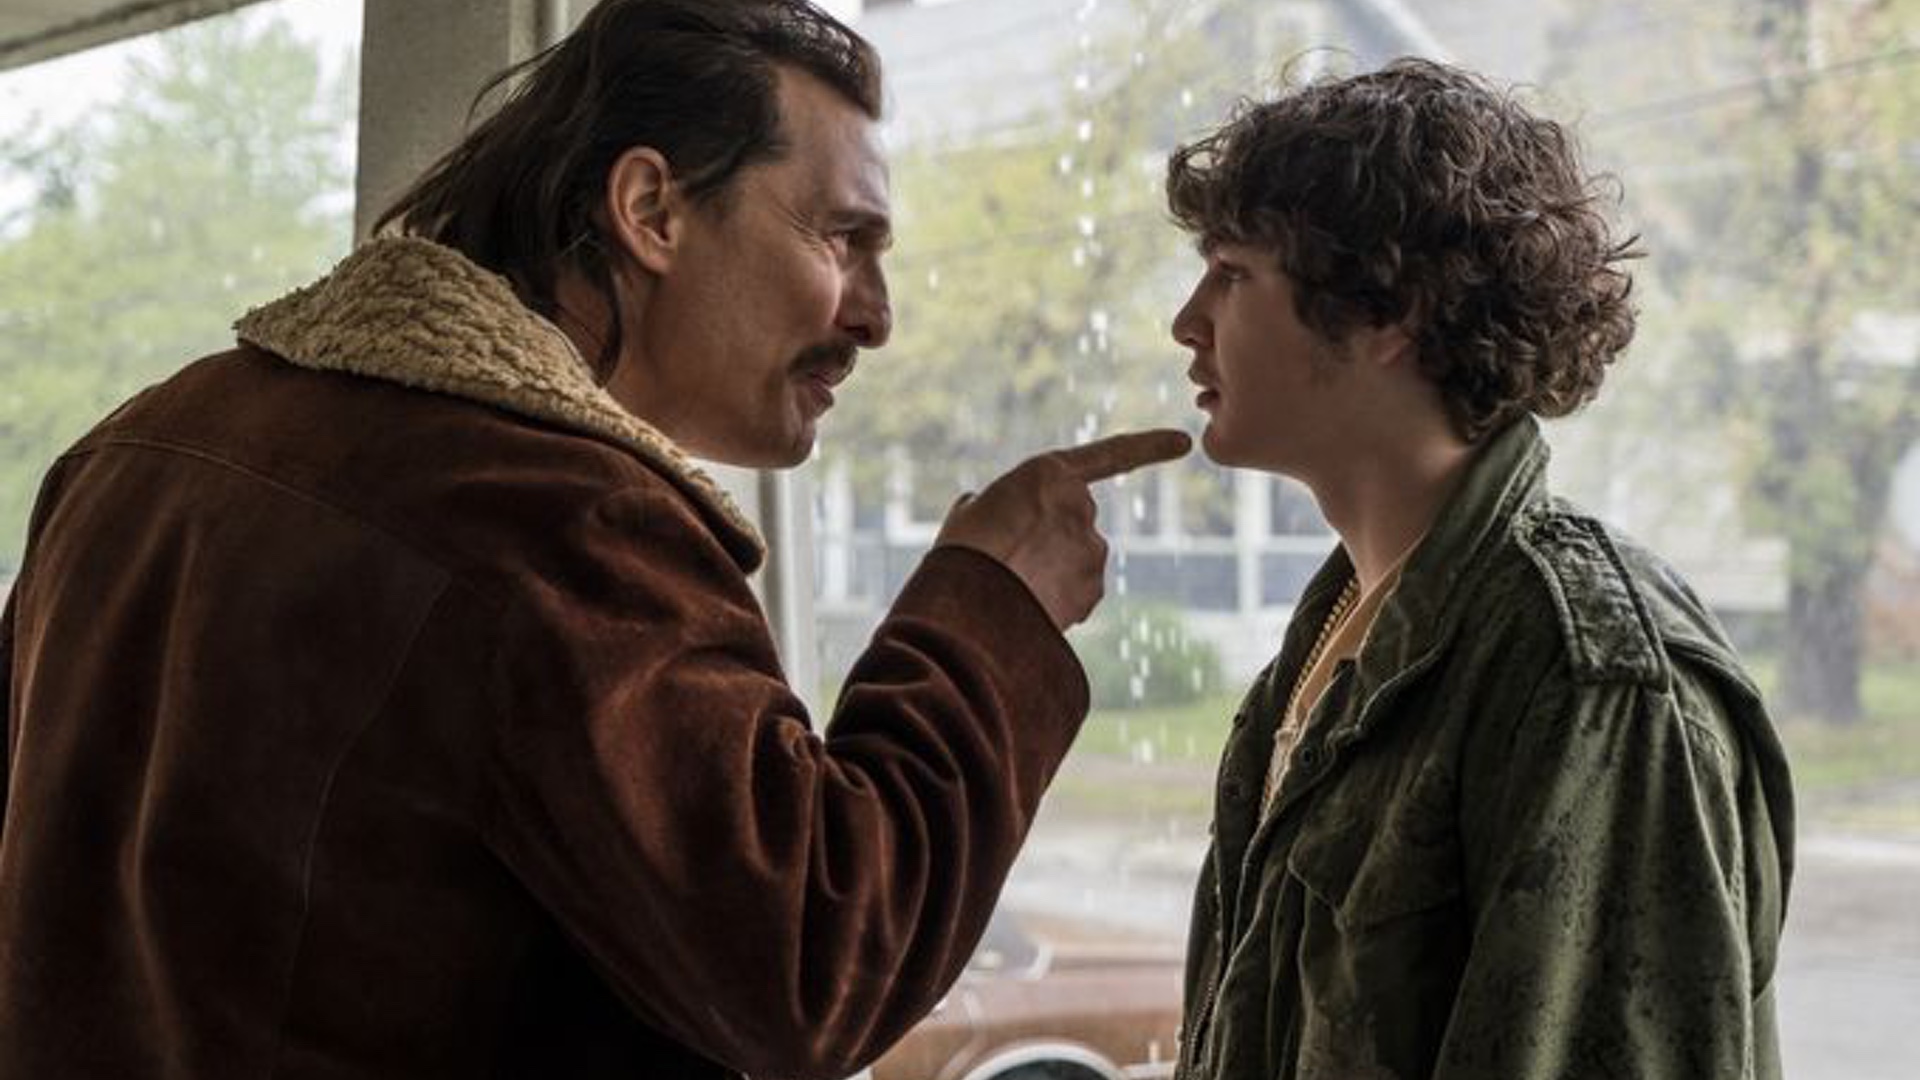 White Boy Rick Review: Strong performances bolster a surprisingly emotional story